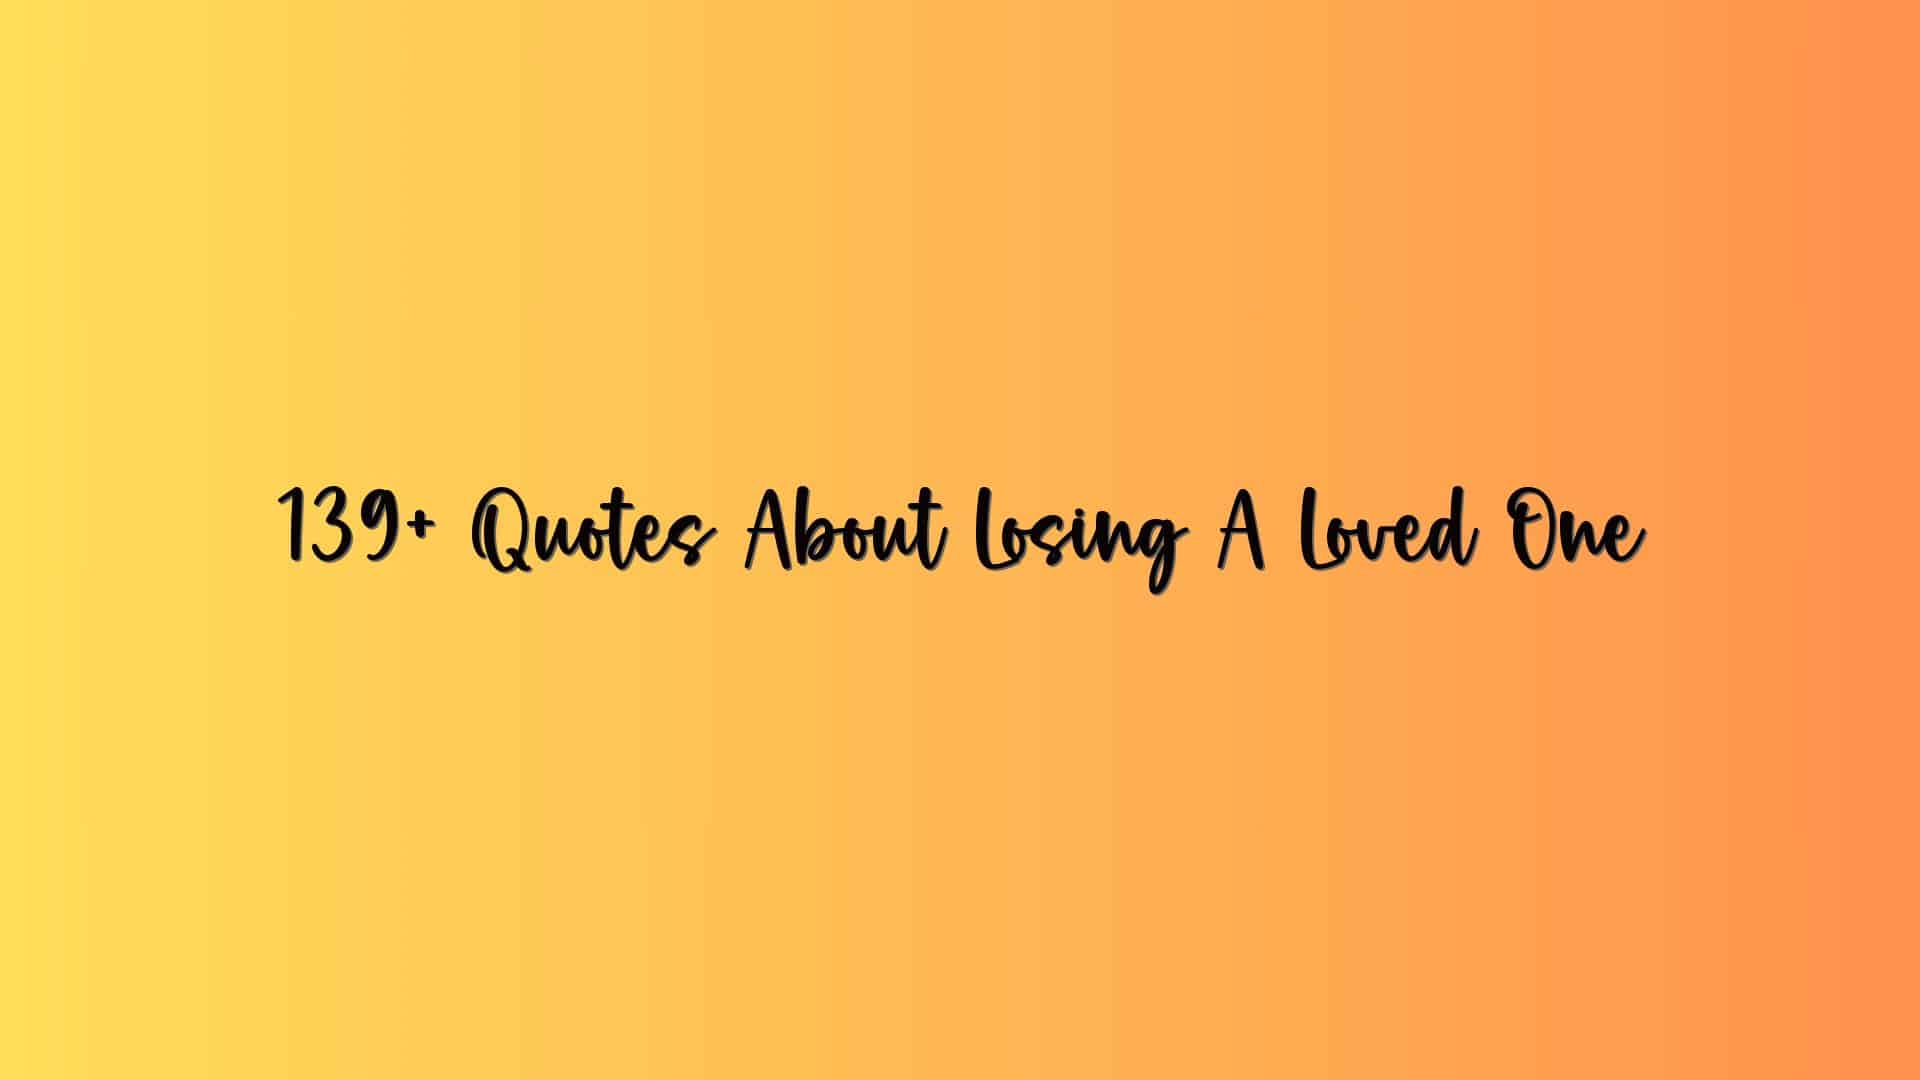 139+ Quotes About Losing A Loved One